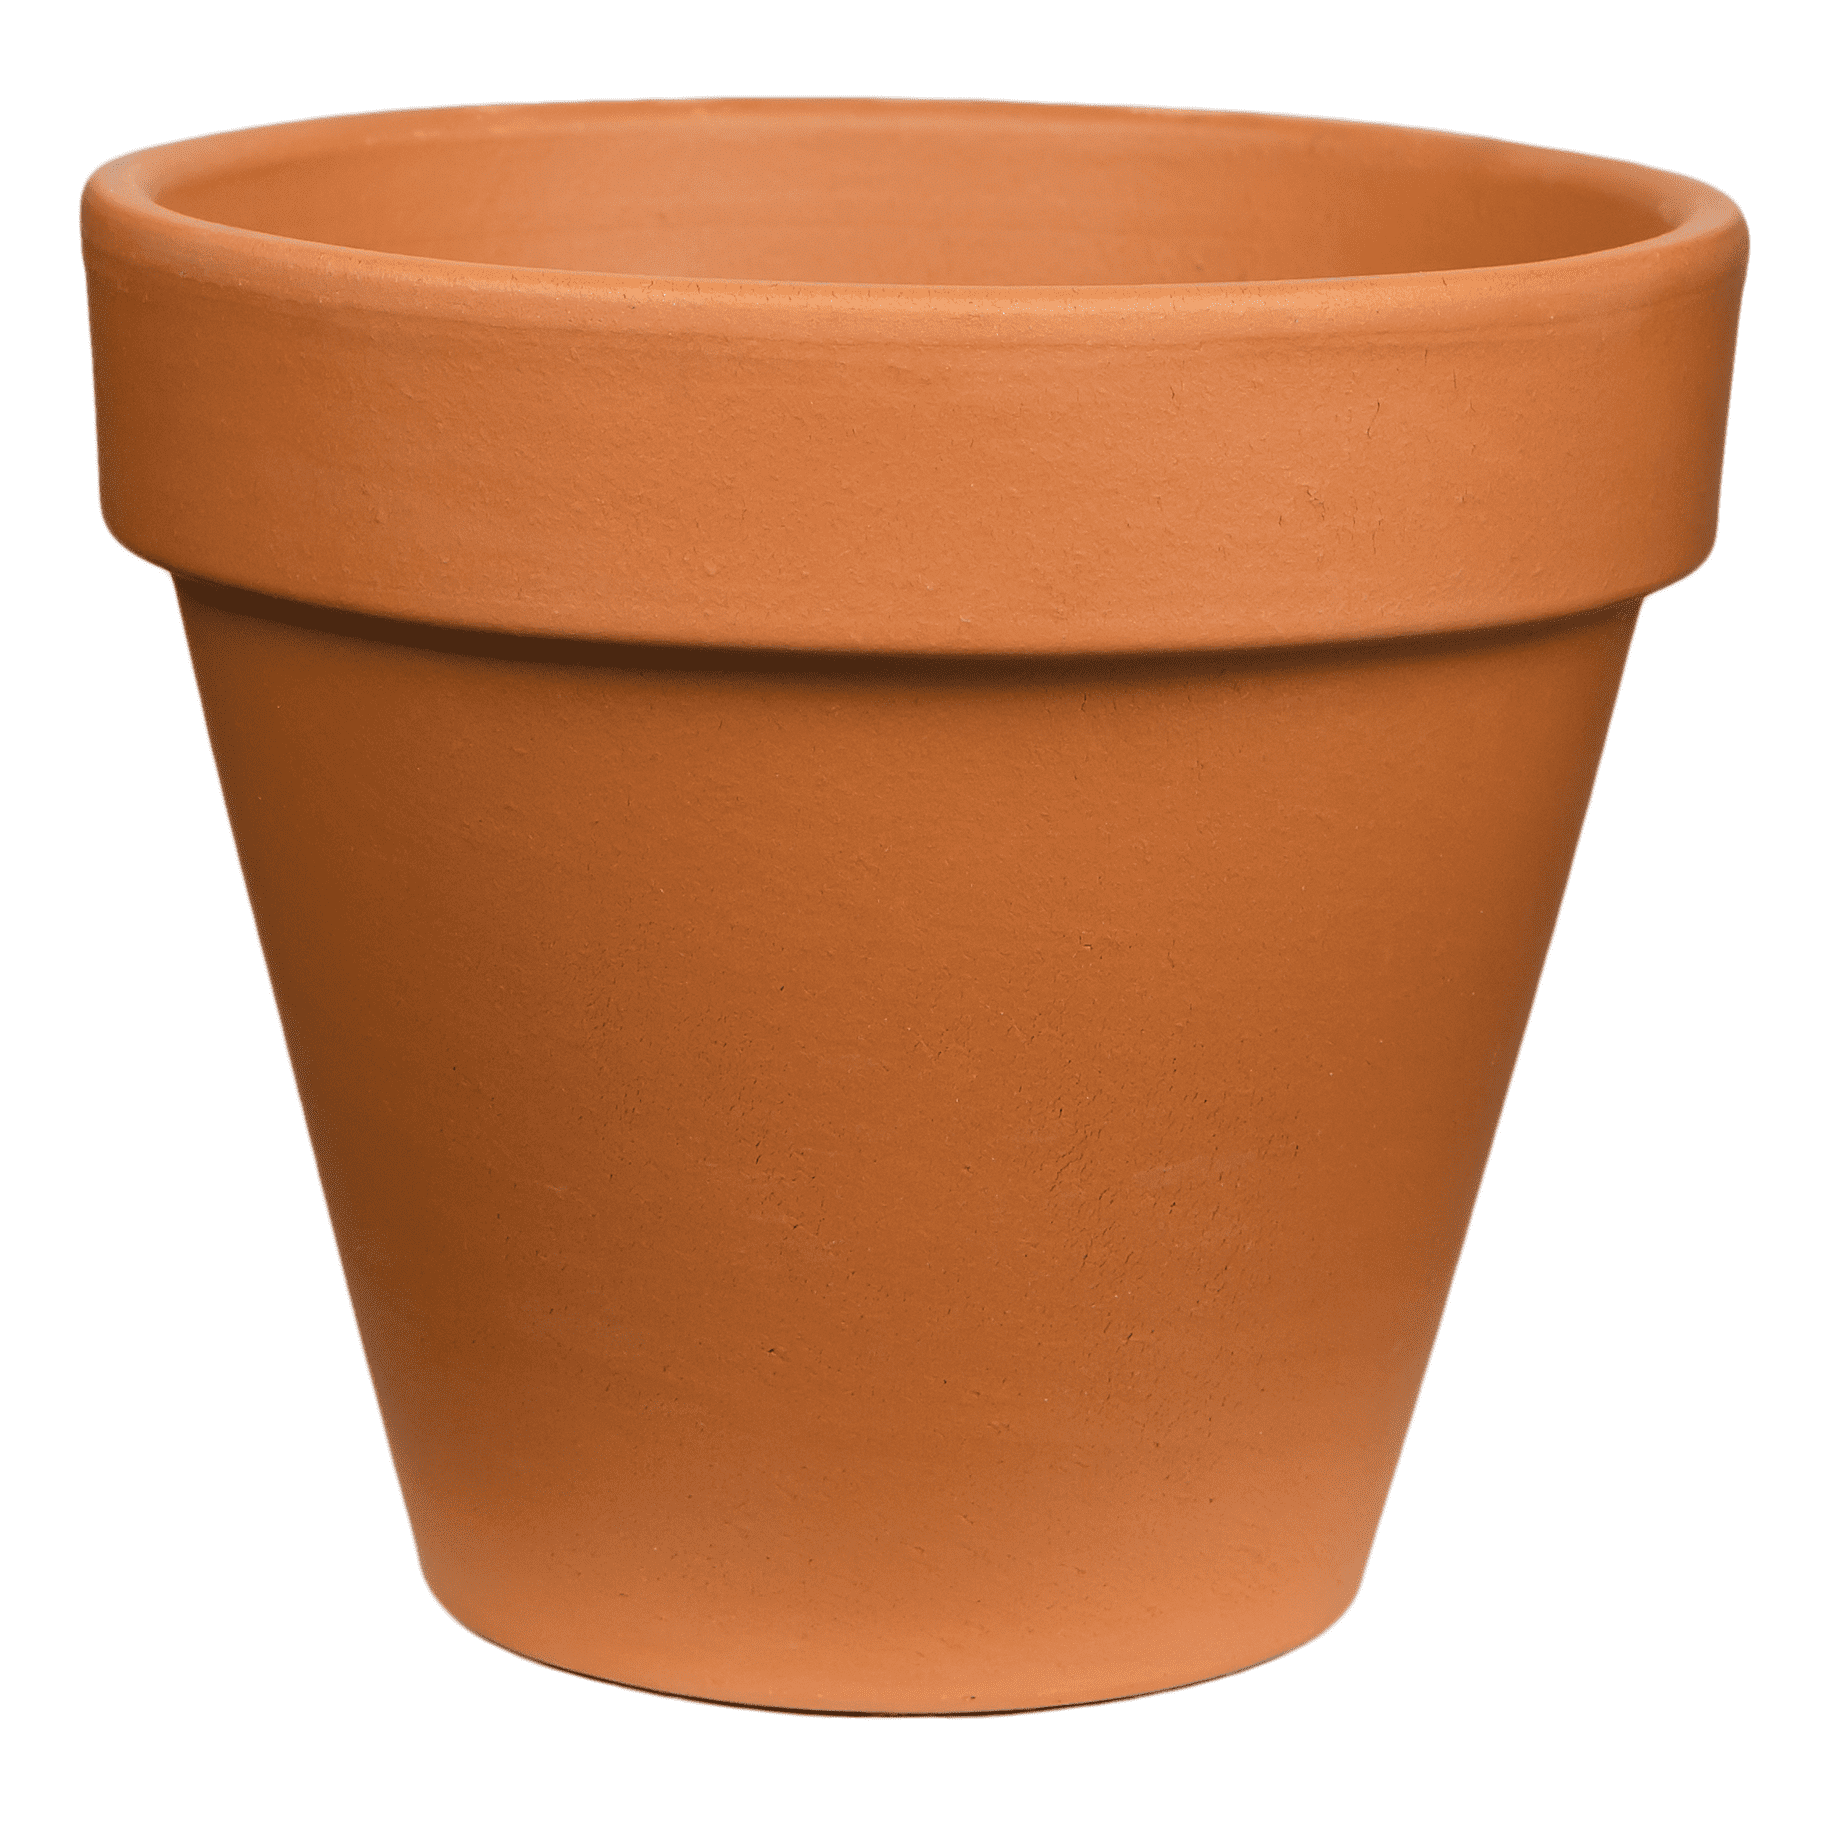 Trendy Hand-painted olive green 4.7 terracotta pot